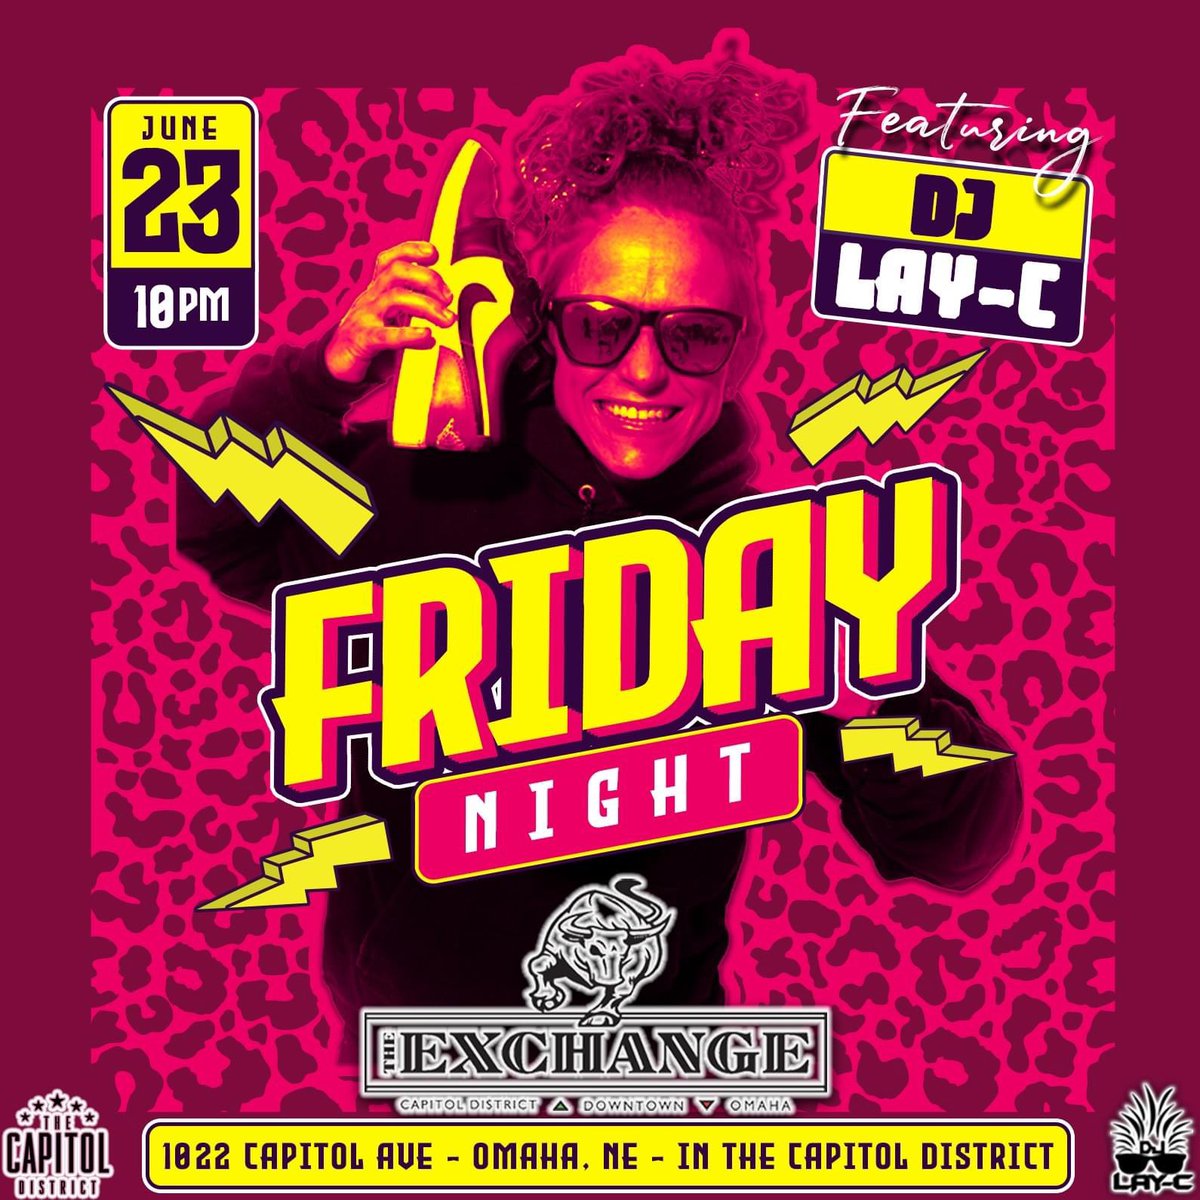 TONIGHT!! DJ Lay-C at The Exchange in The Capitol District downtown starting at 10pm!! See you there!! #DJLayC #TheCapitolDistrict #TheExchange #LiveDJ #FridayNight #June23rd